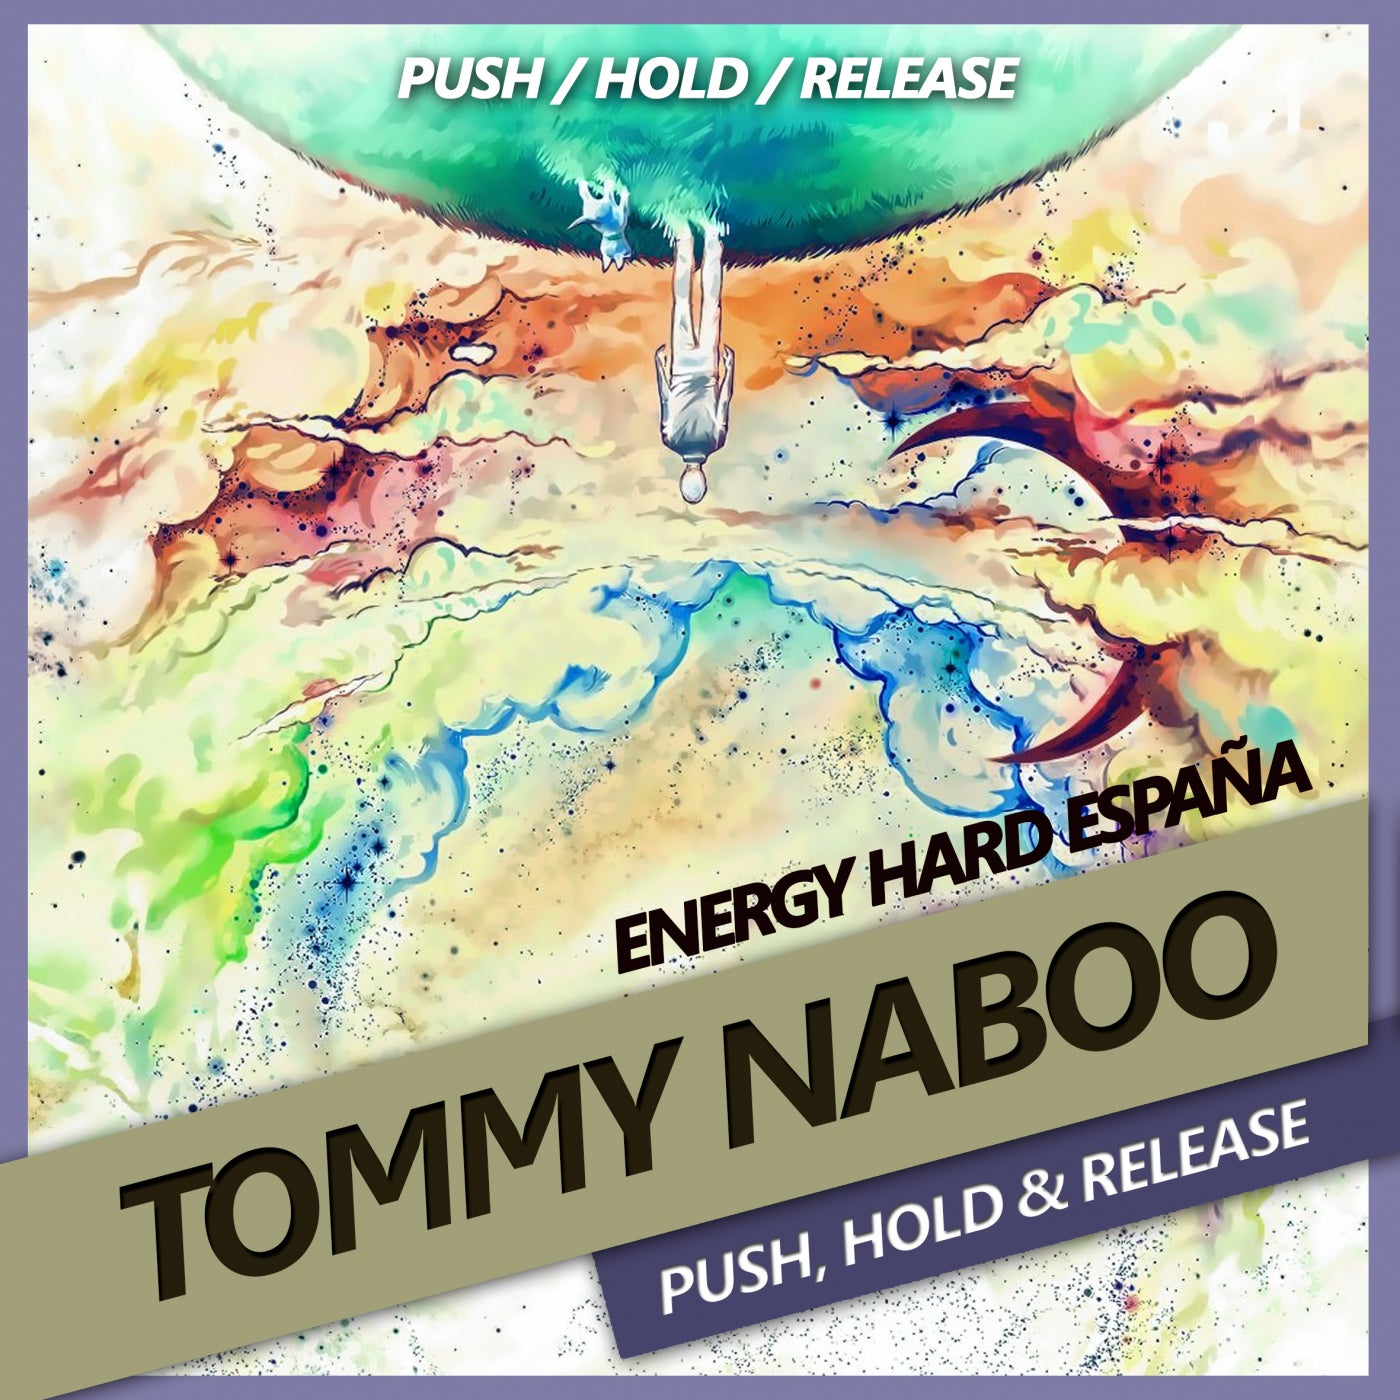 [EHE204] Tommy Naboo - Push. Hold & Release 82f03510-71a7-4ab7-a6b1-43b1bdb8c040